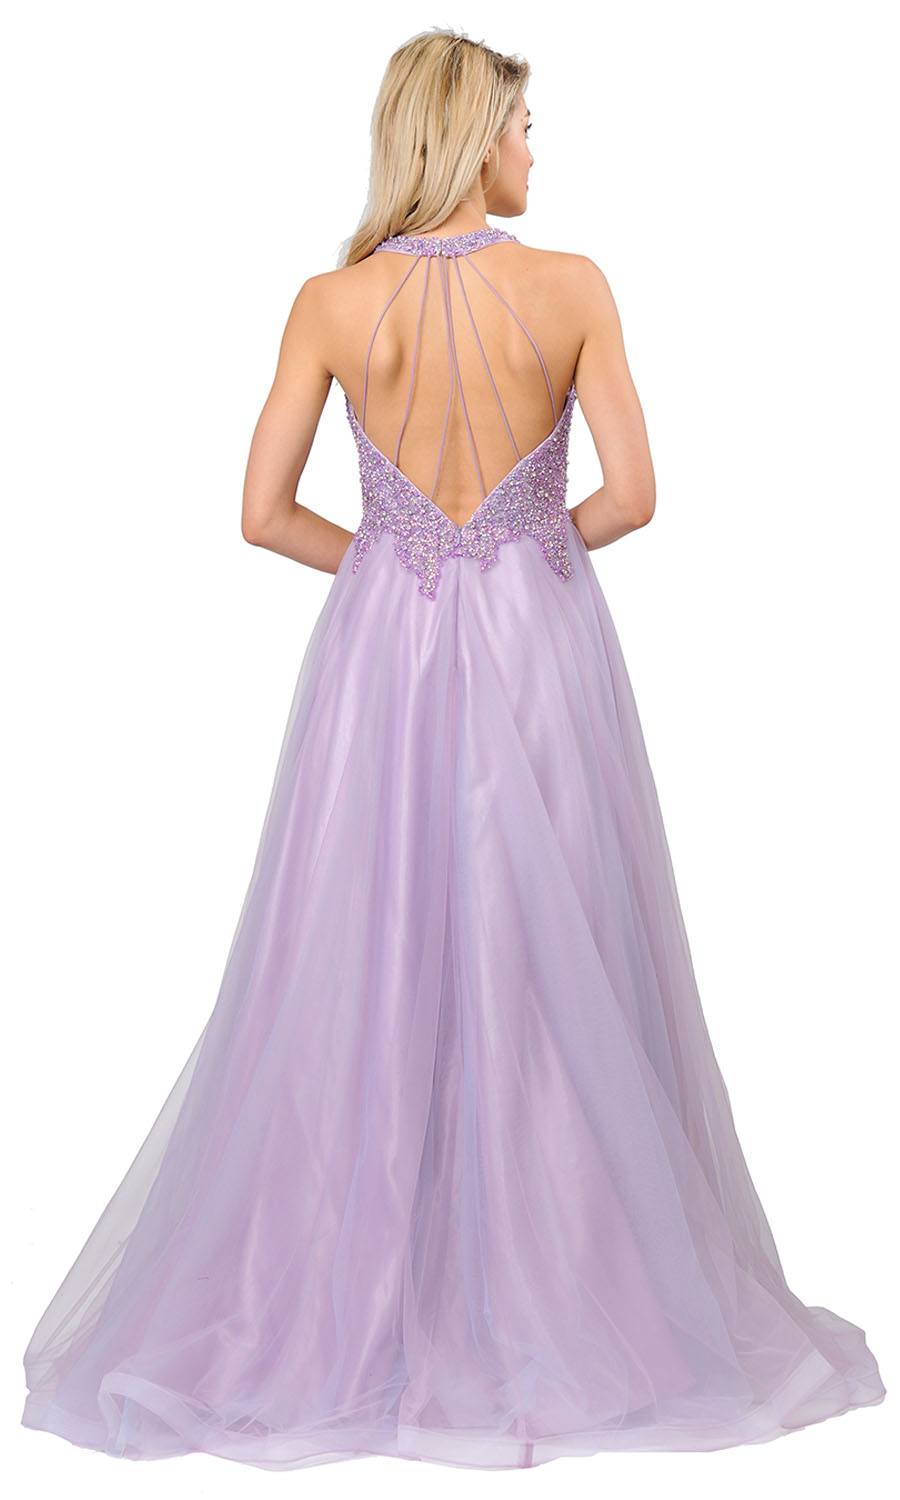 Beaded Long Prom Dress with Strappy Open-Back Lavender